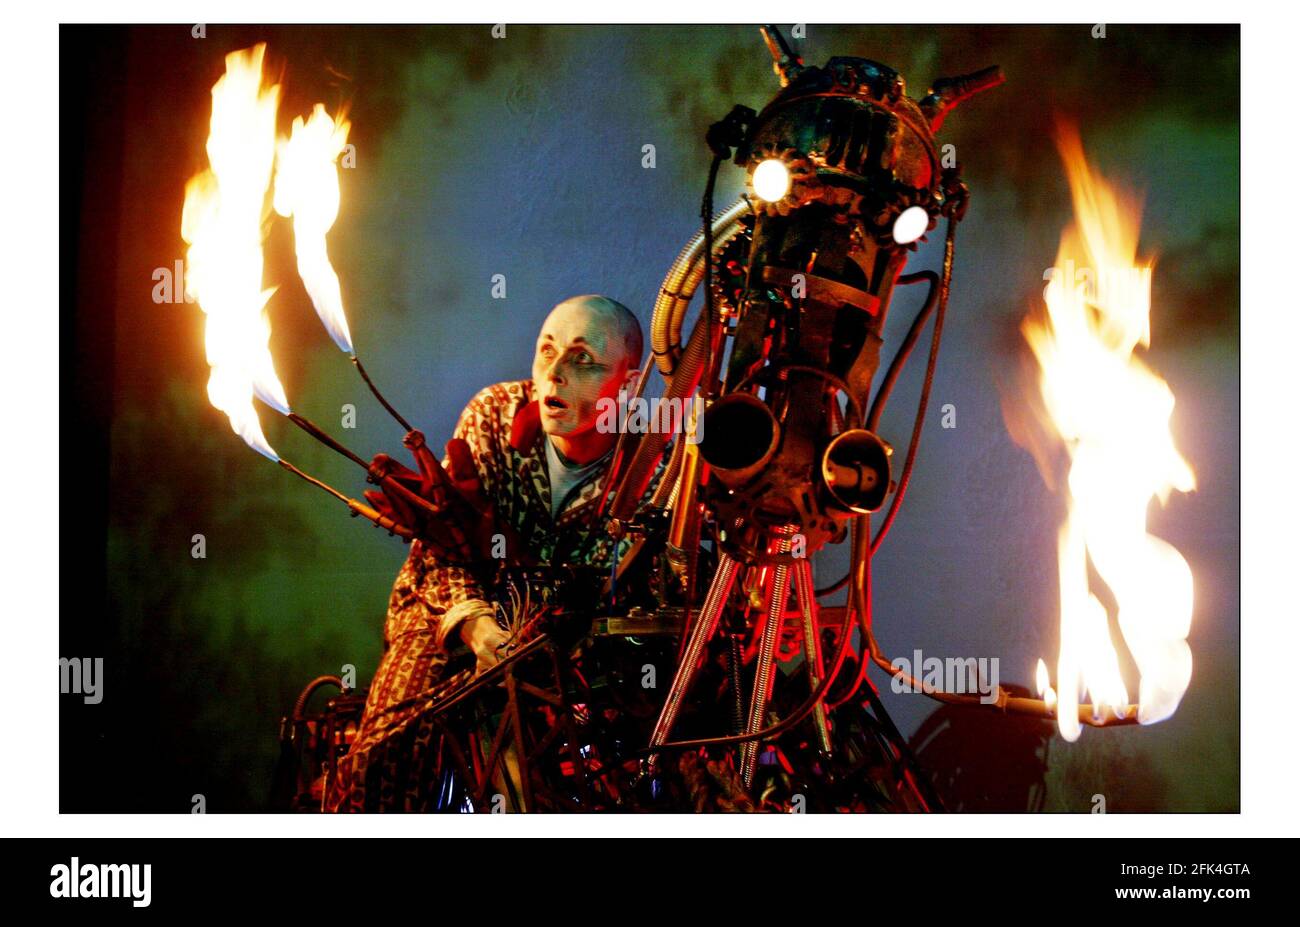 In association with art of regeneration, London international mime festival, forget me not  a spectacular new show from Paka and his life size mechanical steed, on at the Albany theatre Depford Thurs 15 - fri 30 Jan 04.pic David Sandison 14/1/2004 Stock Photo